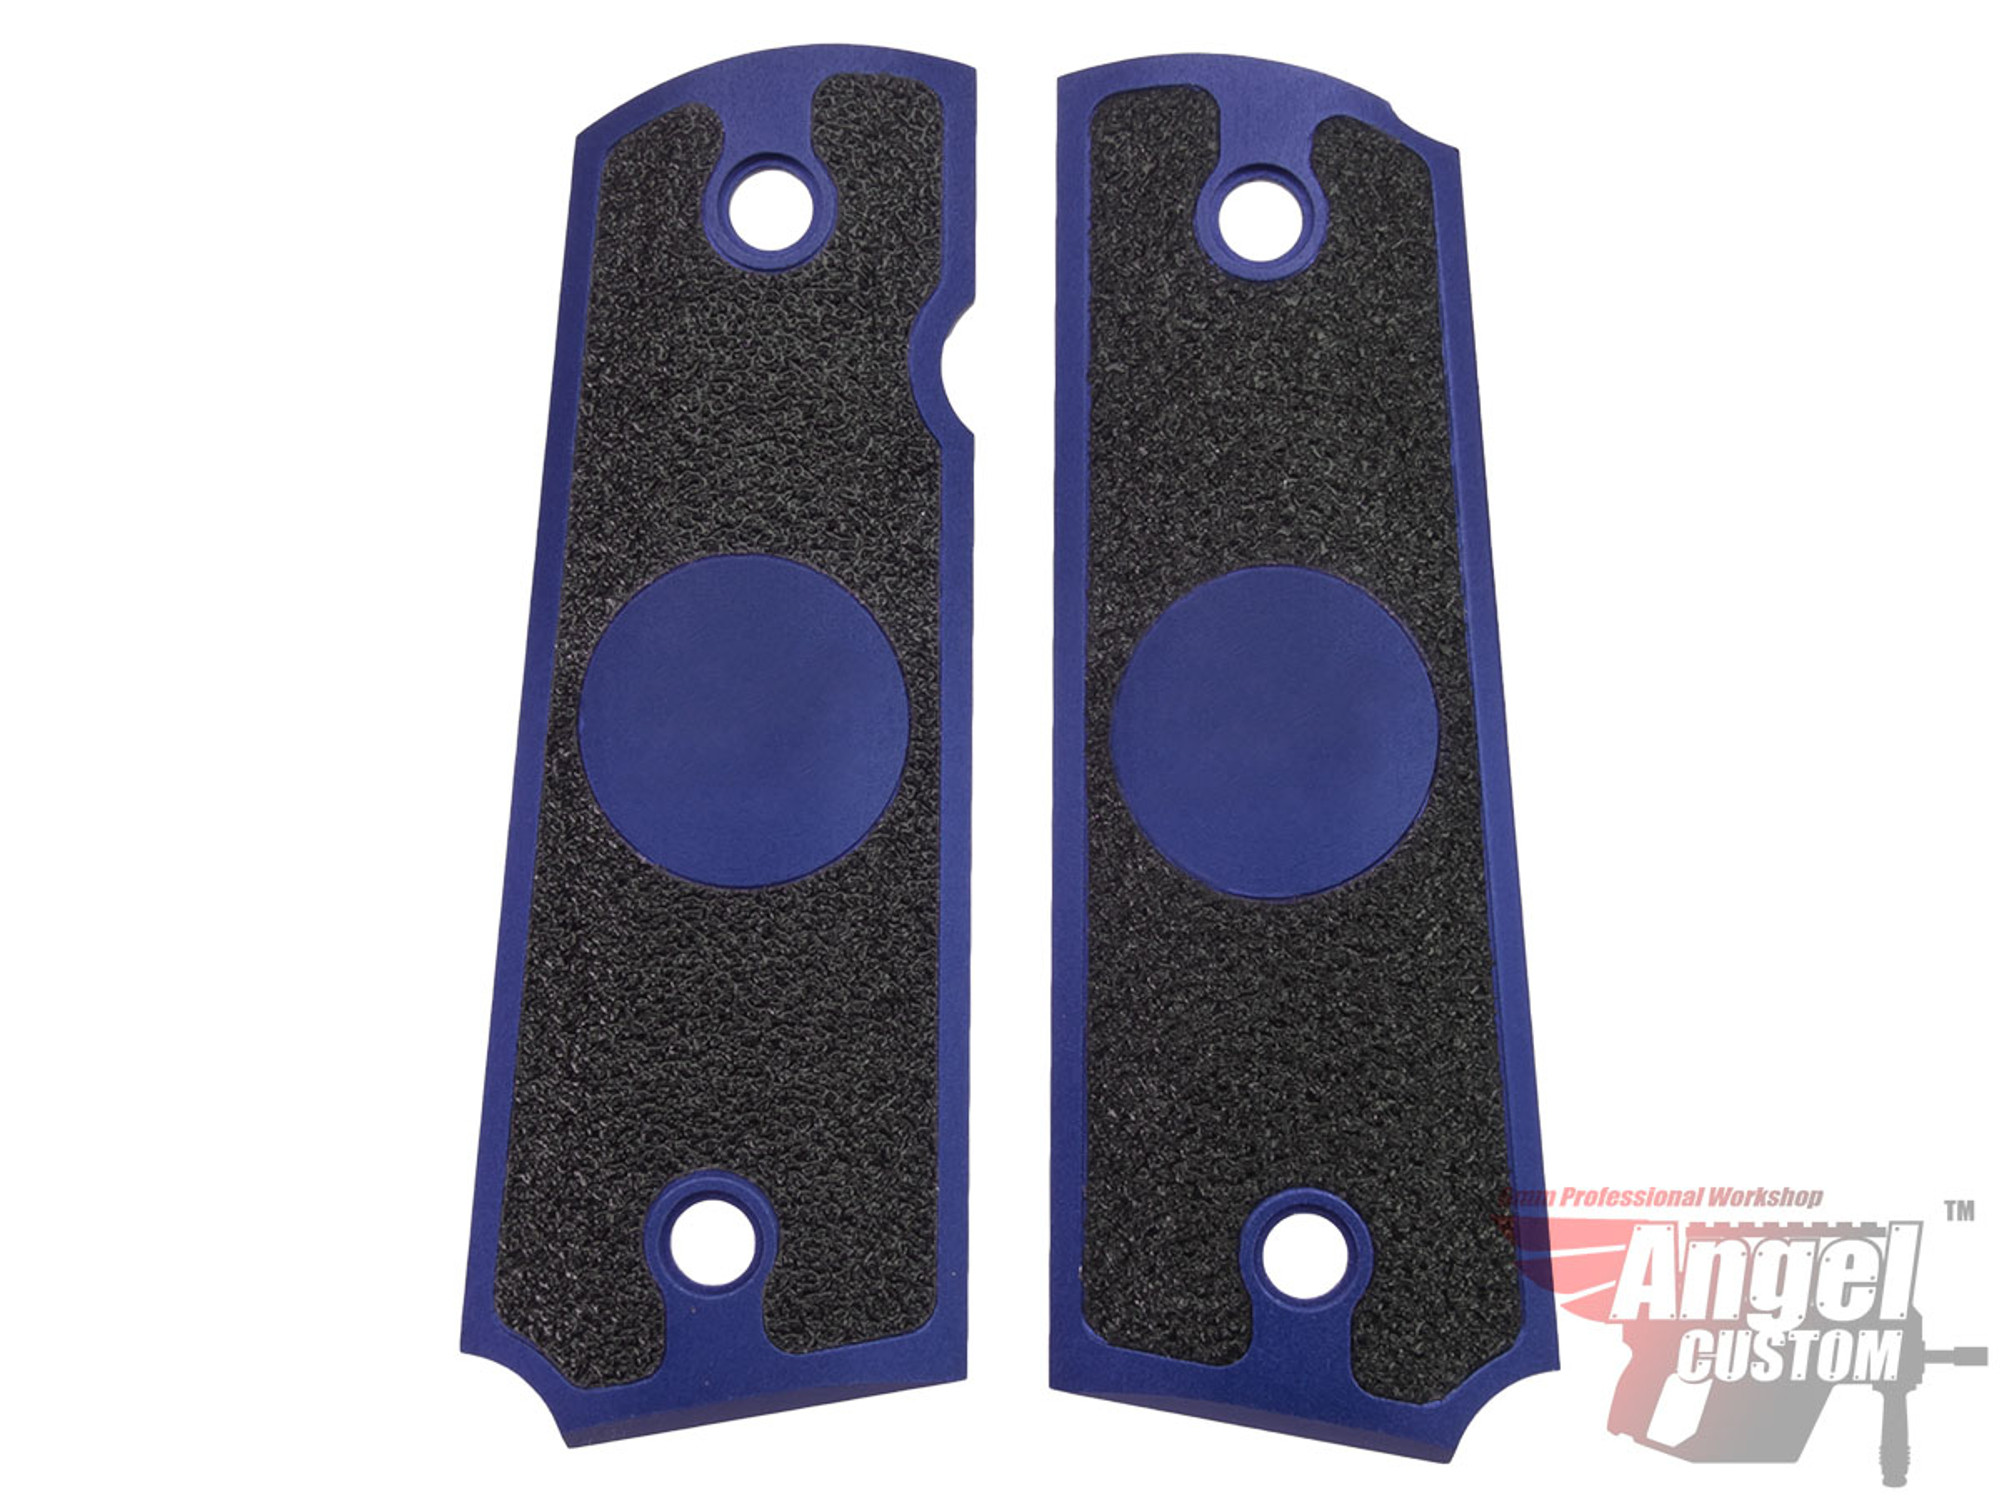 Angel Custom CNC Machined Tac-Glove Grips for WE-Tech 1911 Series Airsoft Pistols - Navy Blue